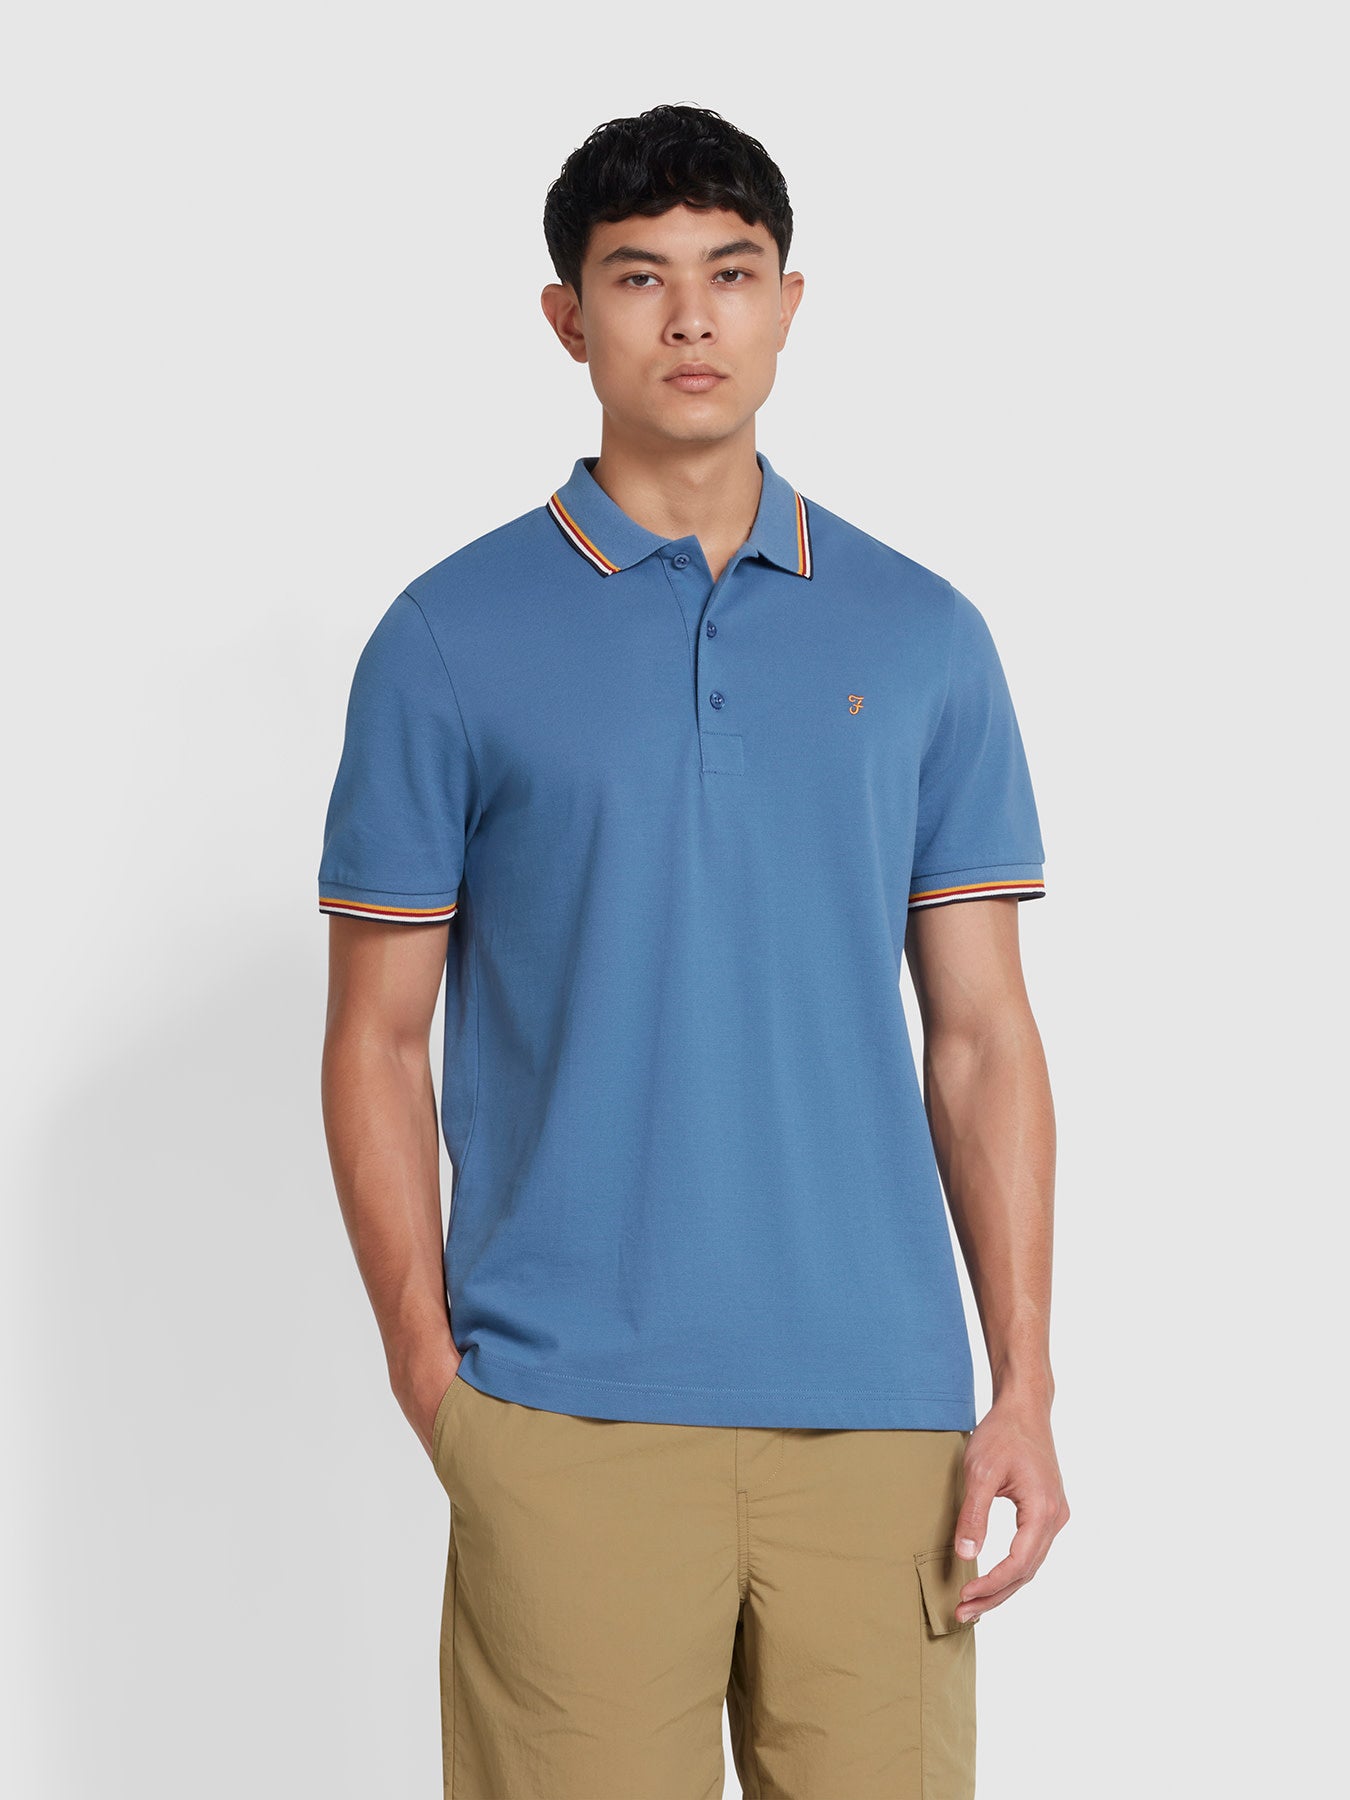 View Alvin Organic Cotton Tipped Collar Short Sleeve Polo Shirt In Sheaf Bl information